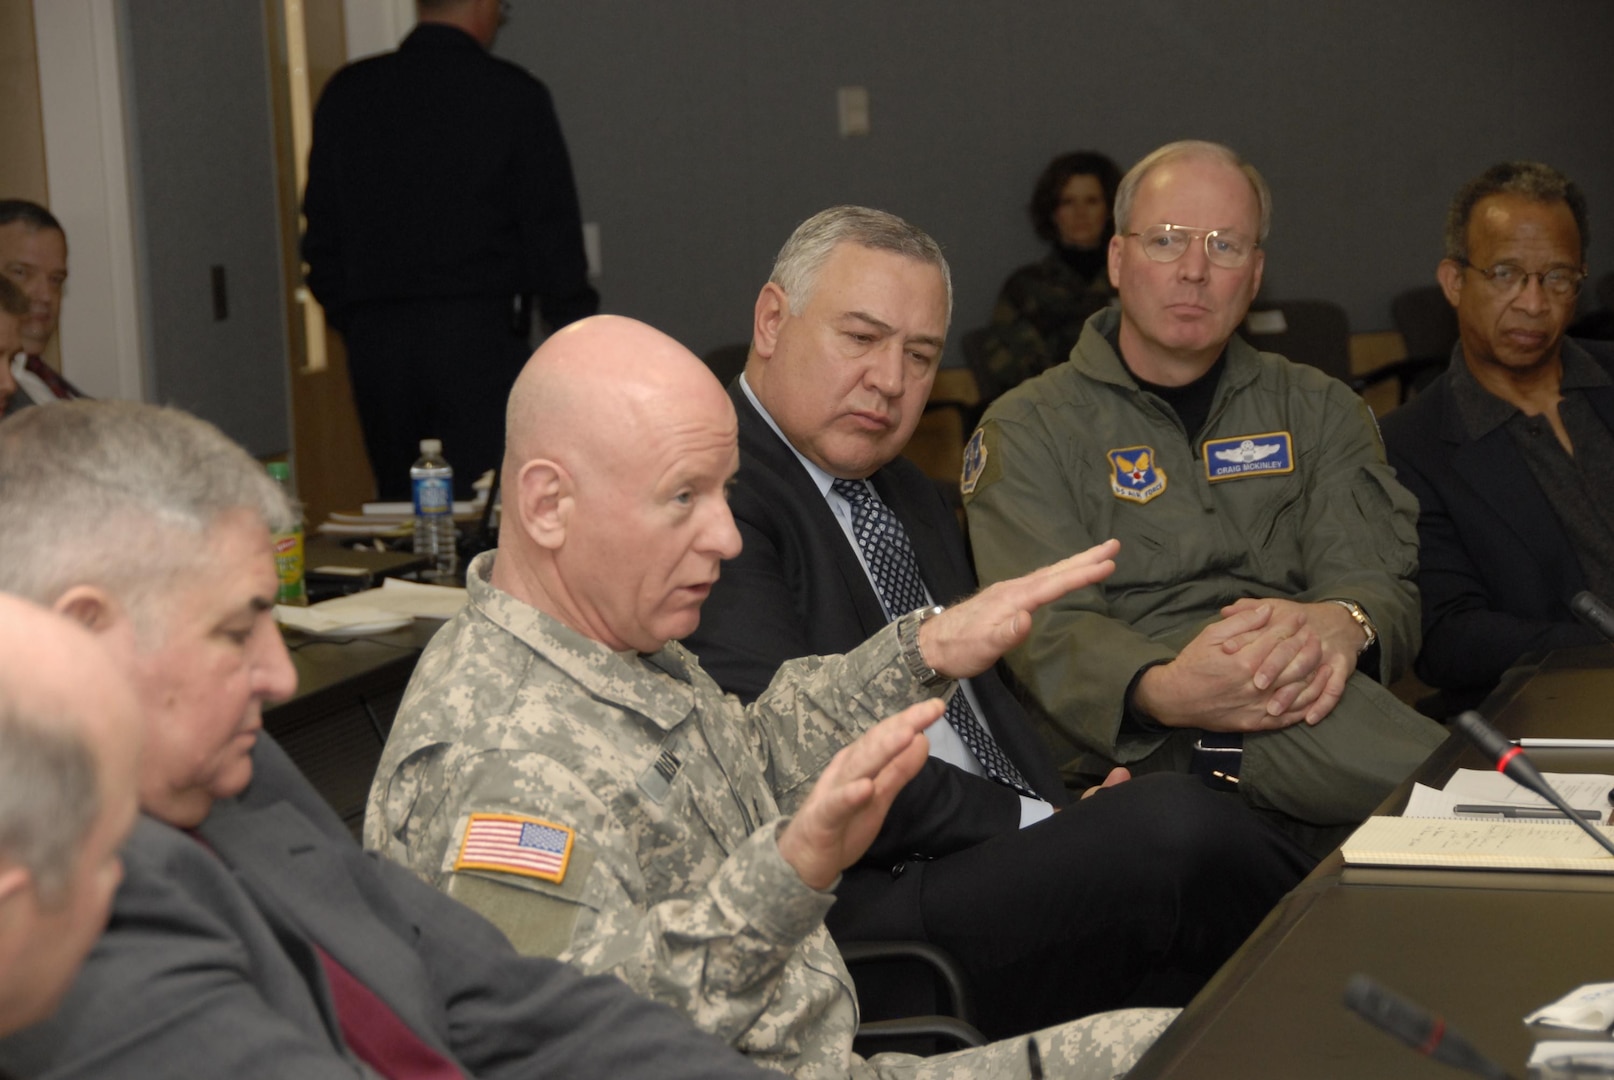 During the "Minuteman Heritage to Horizons" (MH2H) workshop held at the Air National Guard Readiness Center, Andrews AFB on February 23, 2007, LTG H Steven Blum, the Chief of the National Guard Bureau, discusses the Air National Guard's overall future with Lt Gen Craig McKinley, Vice Chief of the National Guard Bureau and Director of the Air National Guard.  Other important past Air Force and Air Guard Leadership were also present during this workshop, such as General (Ret. USAF) Ronald R. Fogleman, General (Ret. USAF) Charles F. "Chuck" Wald and Lt Gen (Ret.) Russell Davis on shown in this image.